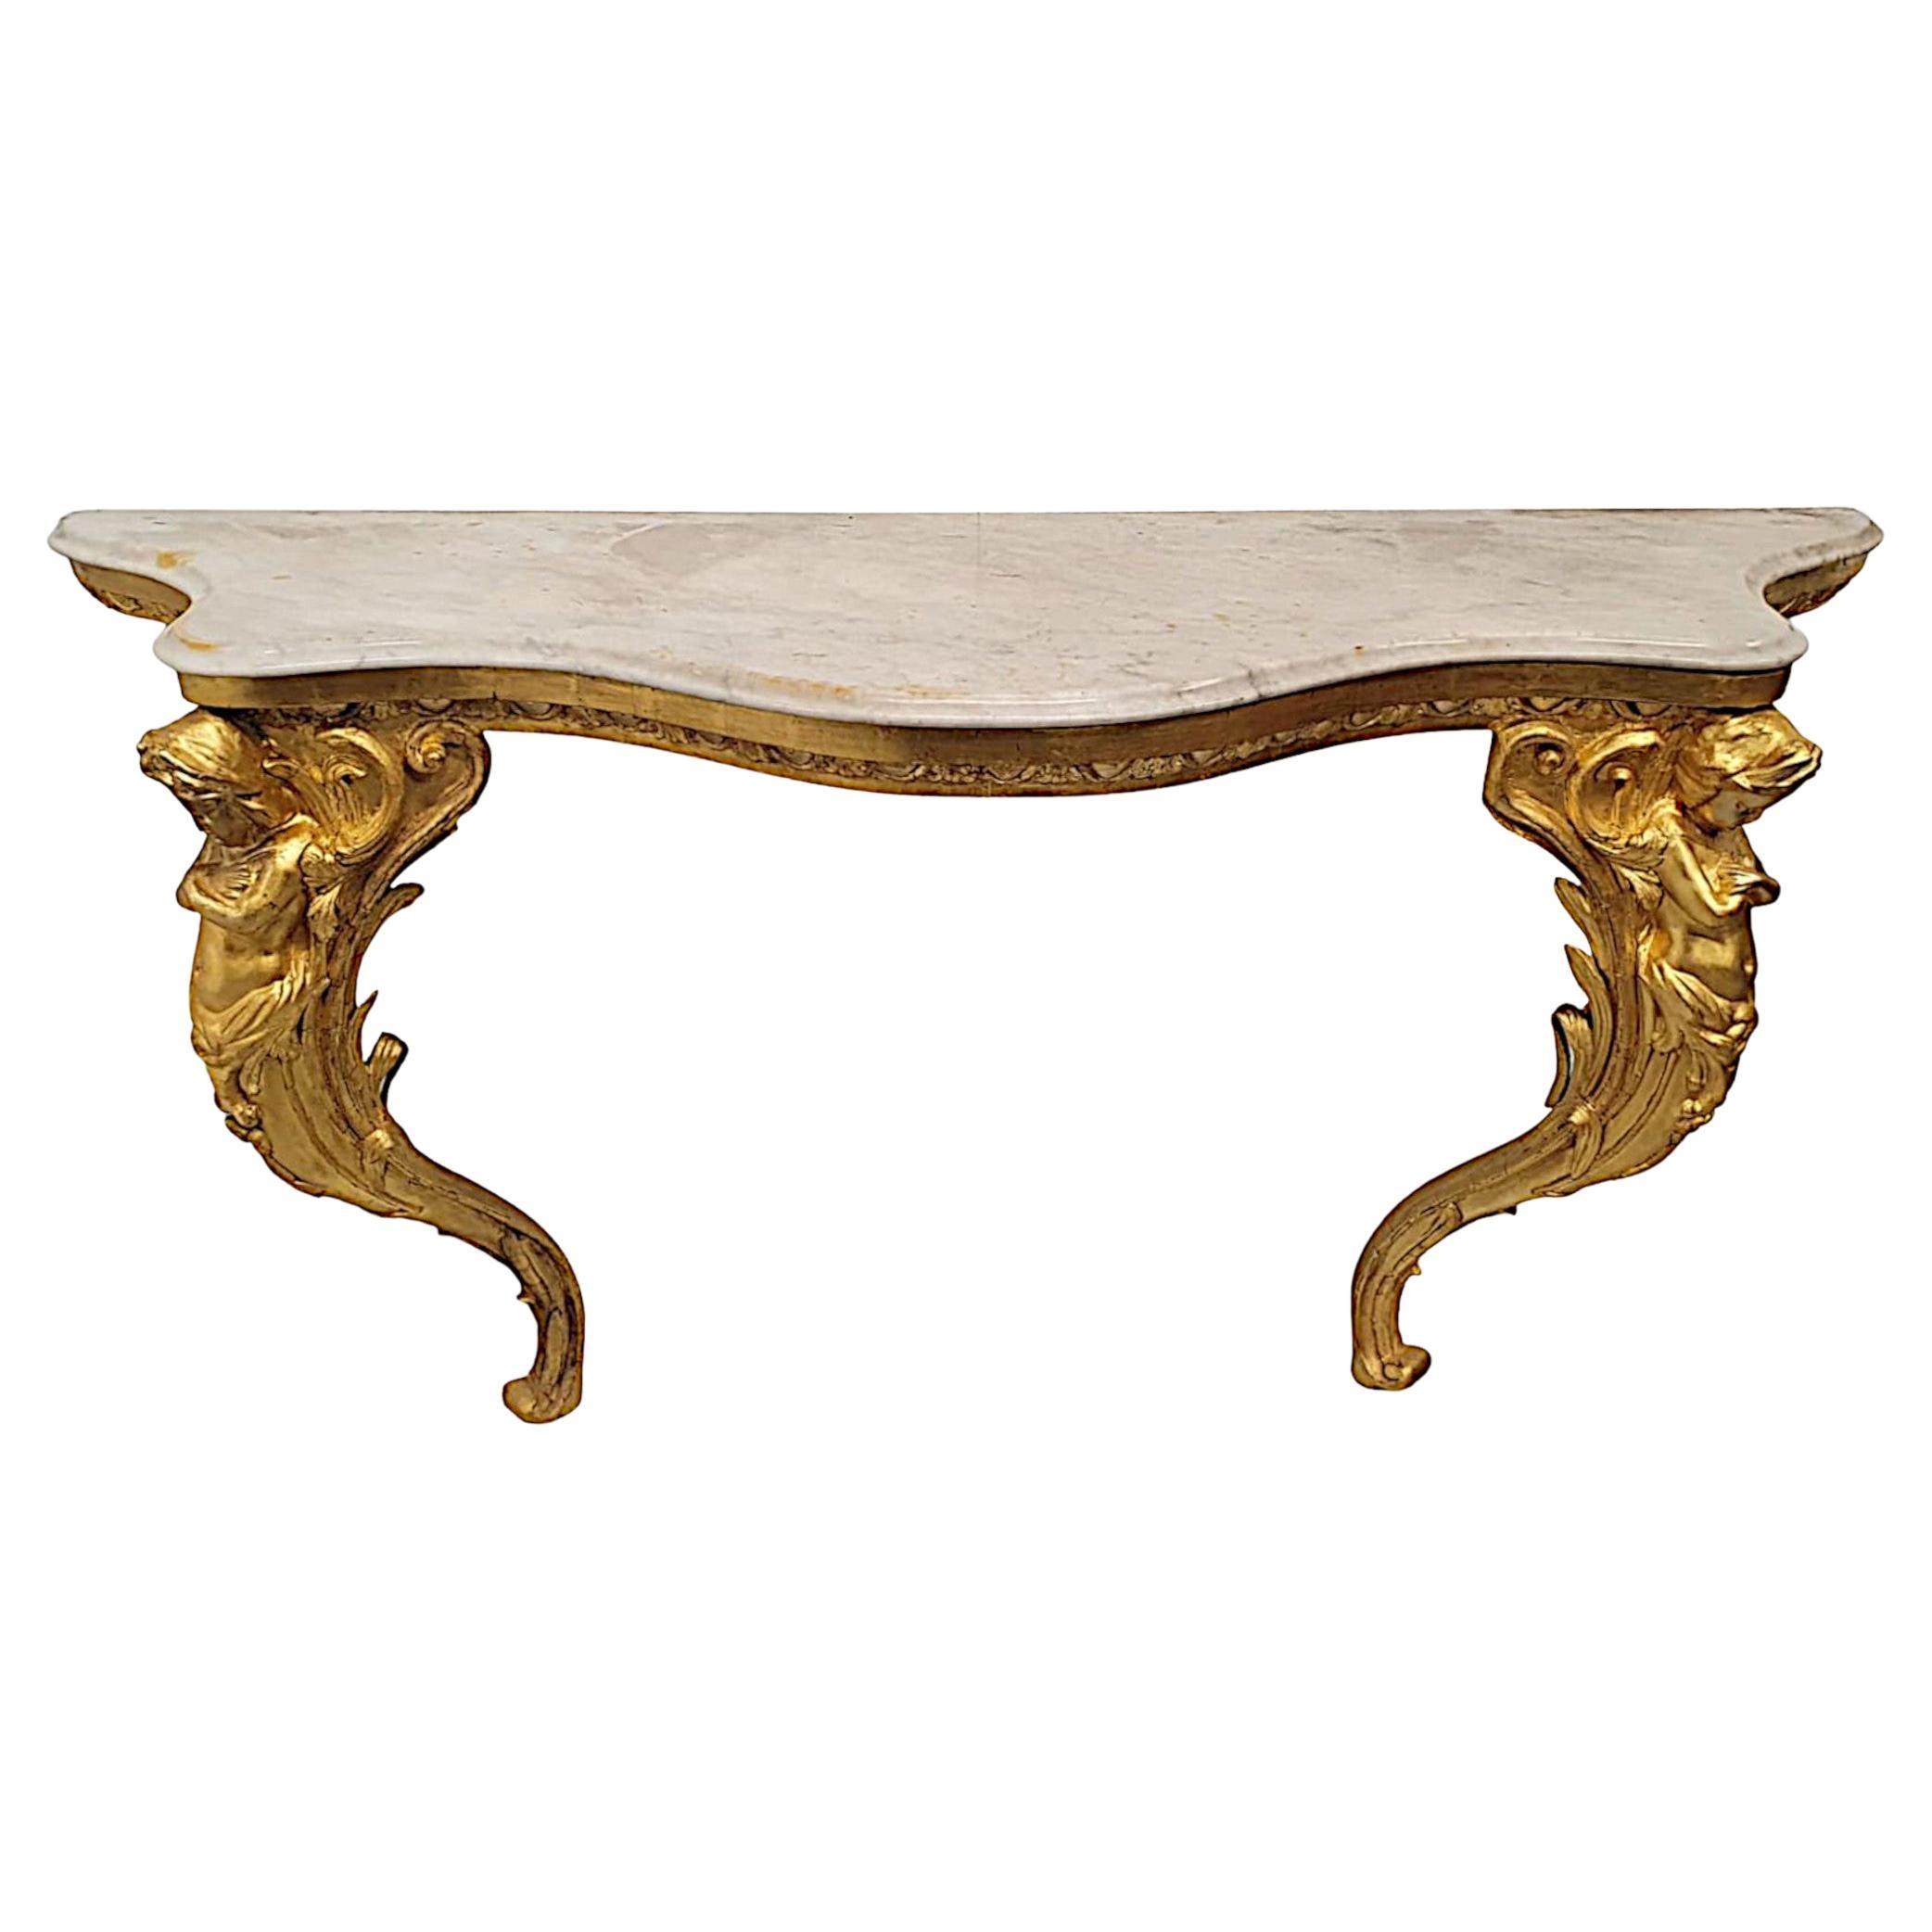  A Very Fine and Rare 19th Century marble Top Giltwood Console Table  For Sale